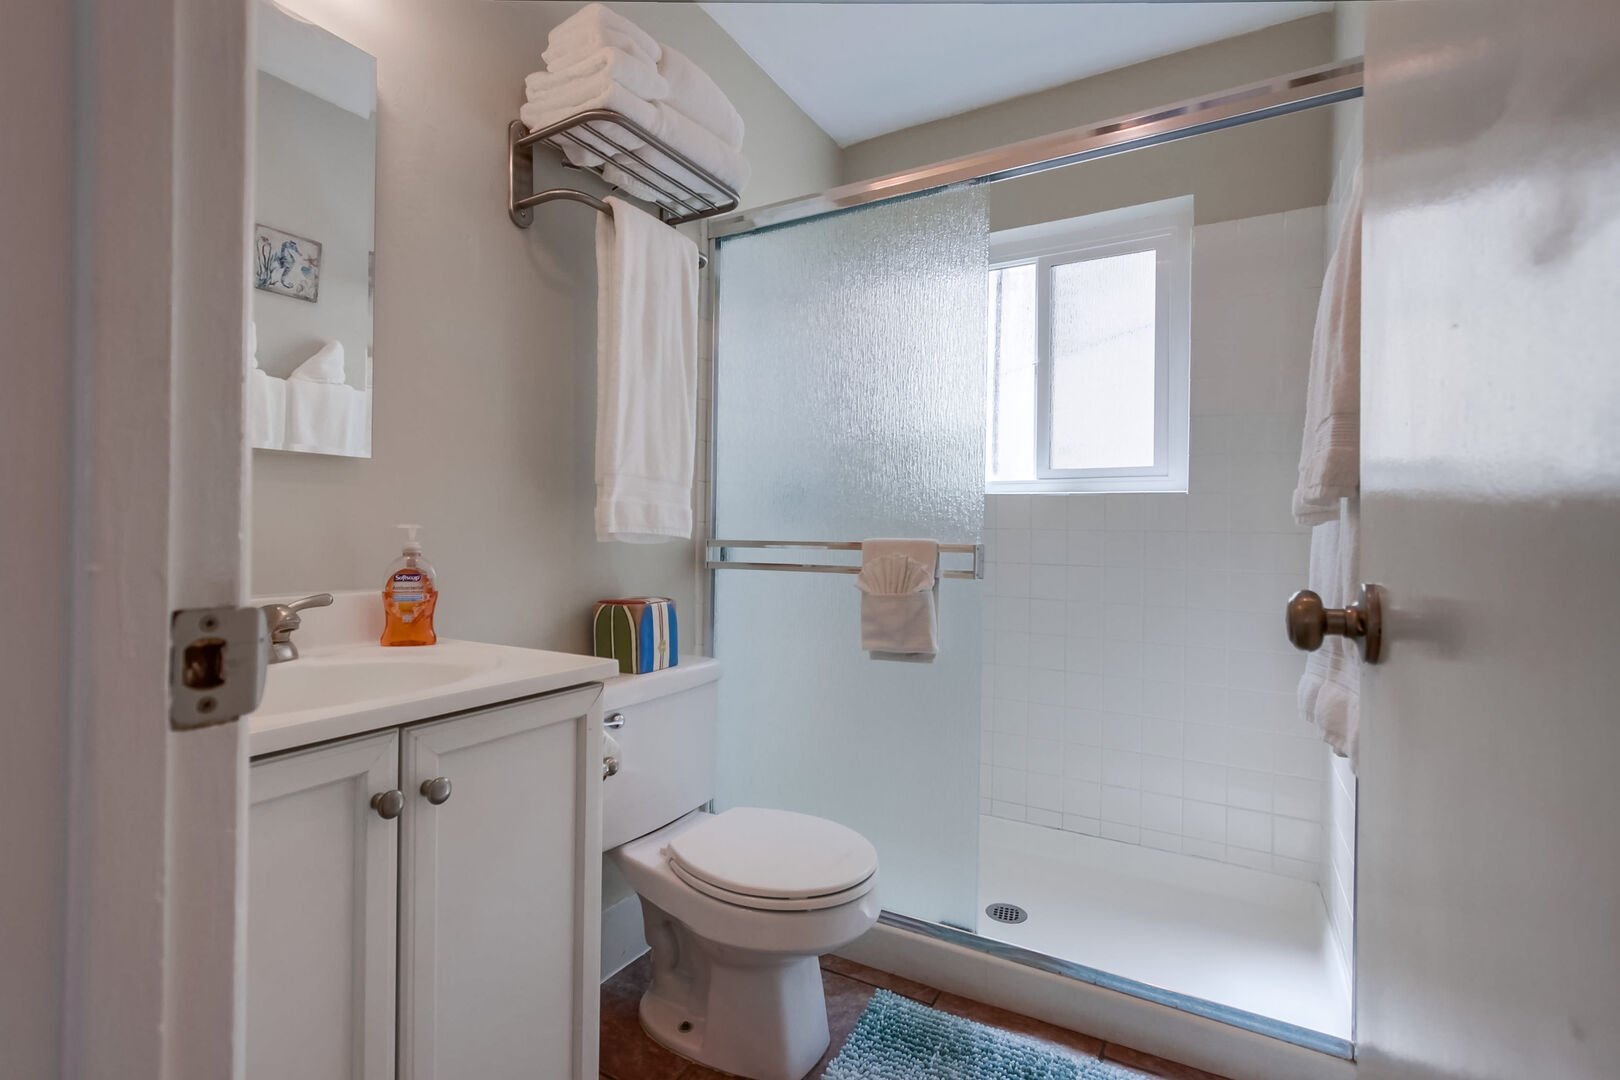 Shared bathroom with walk-in shower